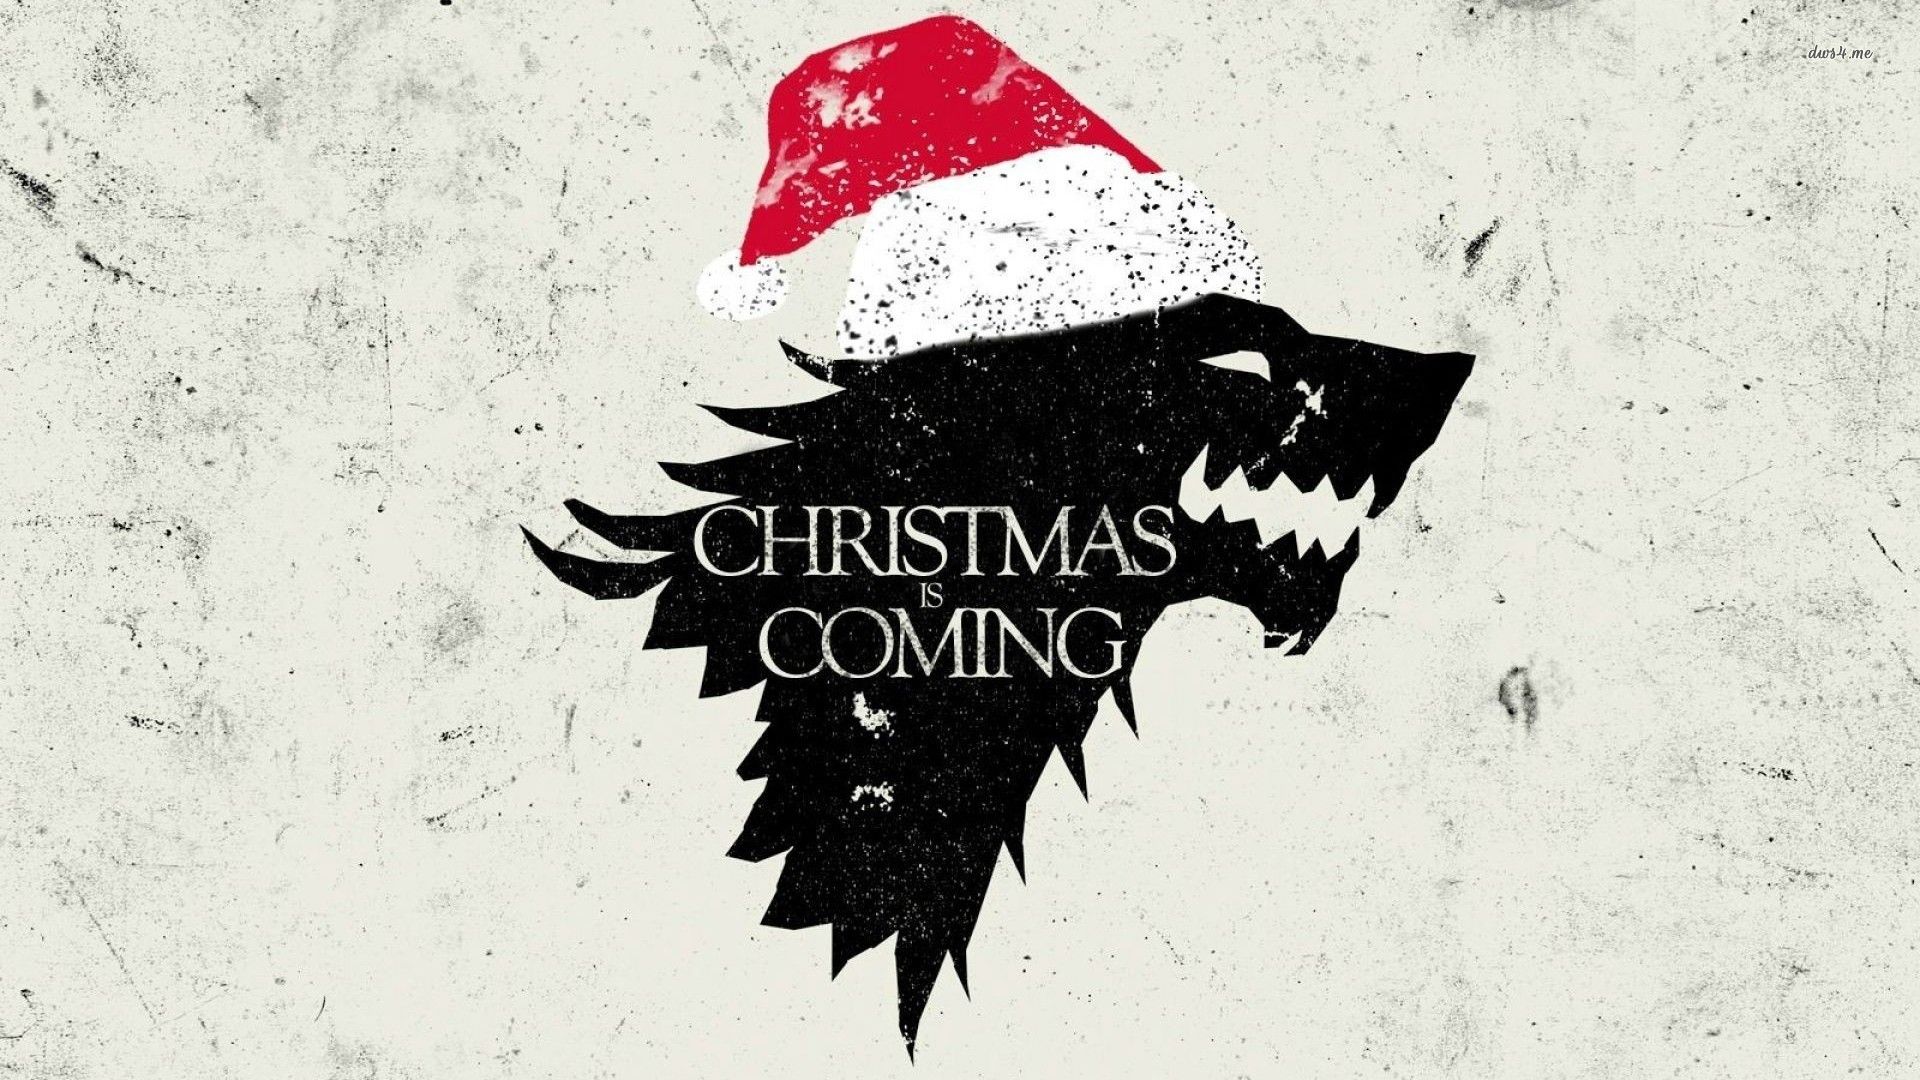 Christmas is coming in House Stark wallpaper - TV Show wallpapers